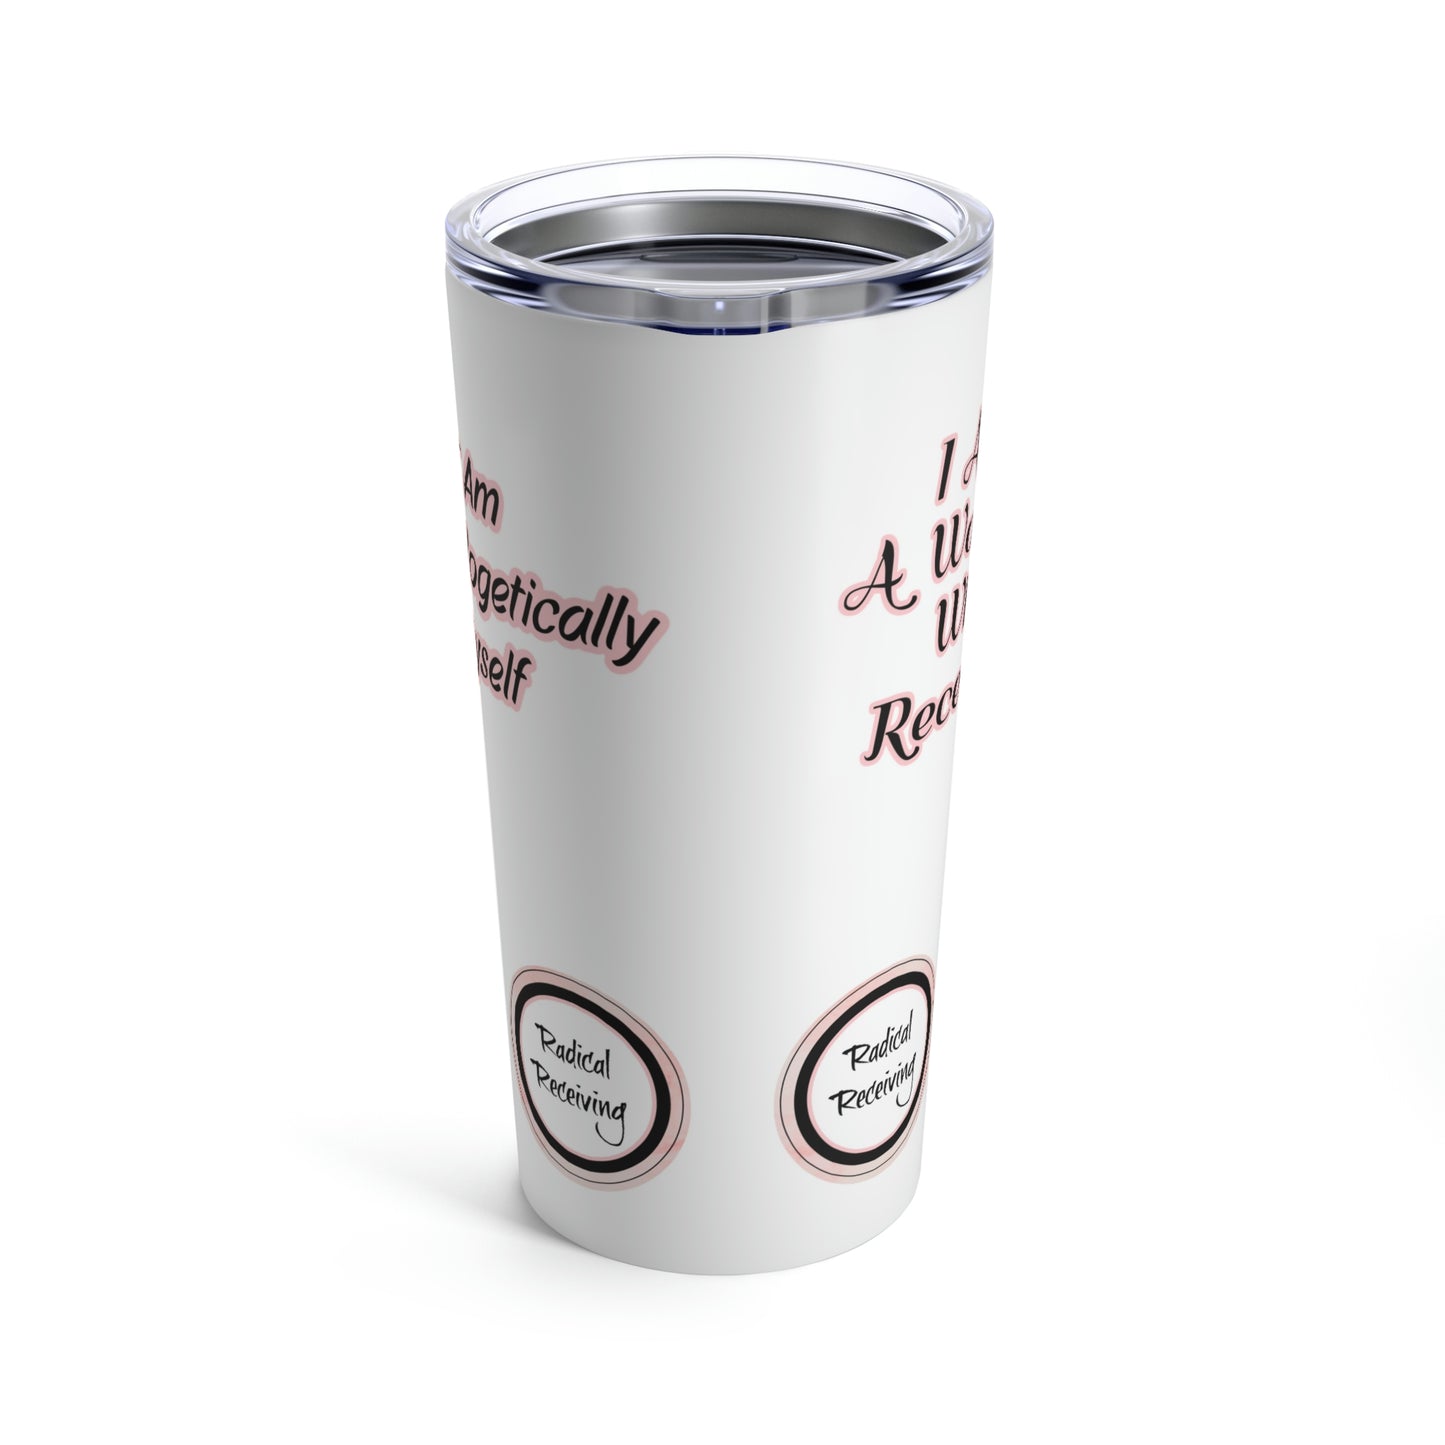 I Am Unapologetically Myself - I Am A Woman Who Receives - 20 oz stainless steel travel tumbler